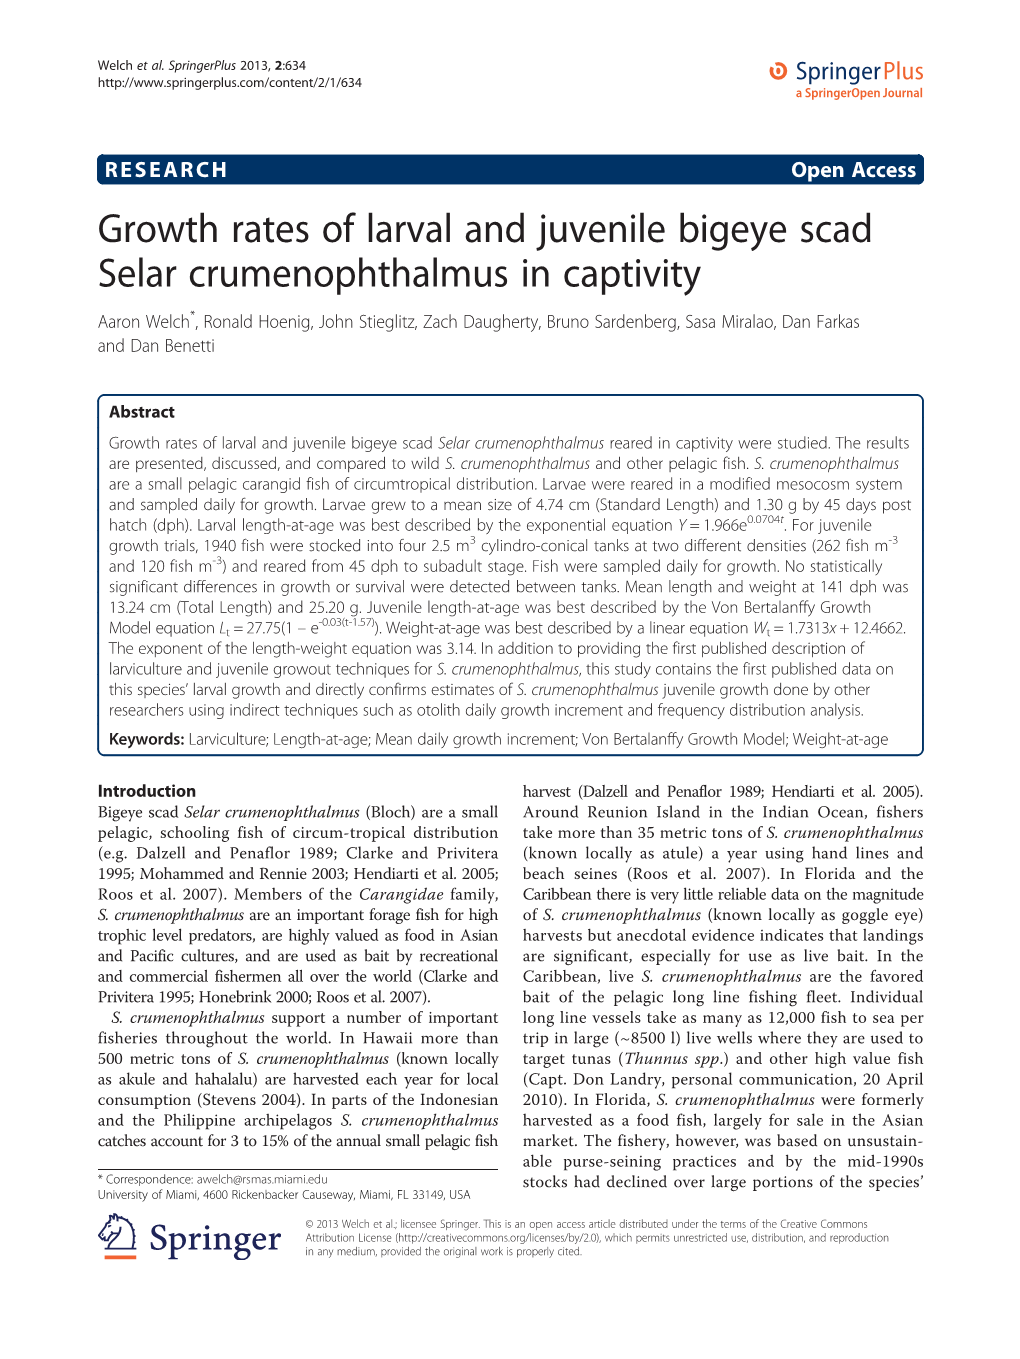 Growth Rates of Larval and Juvenile Bigeye Scad Selar